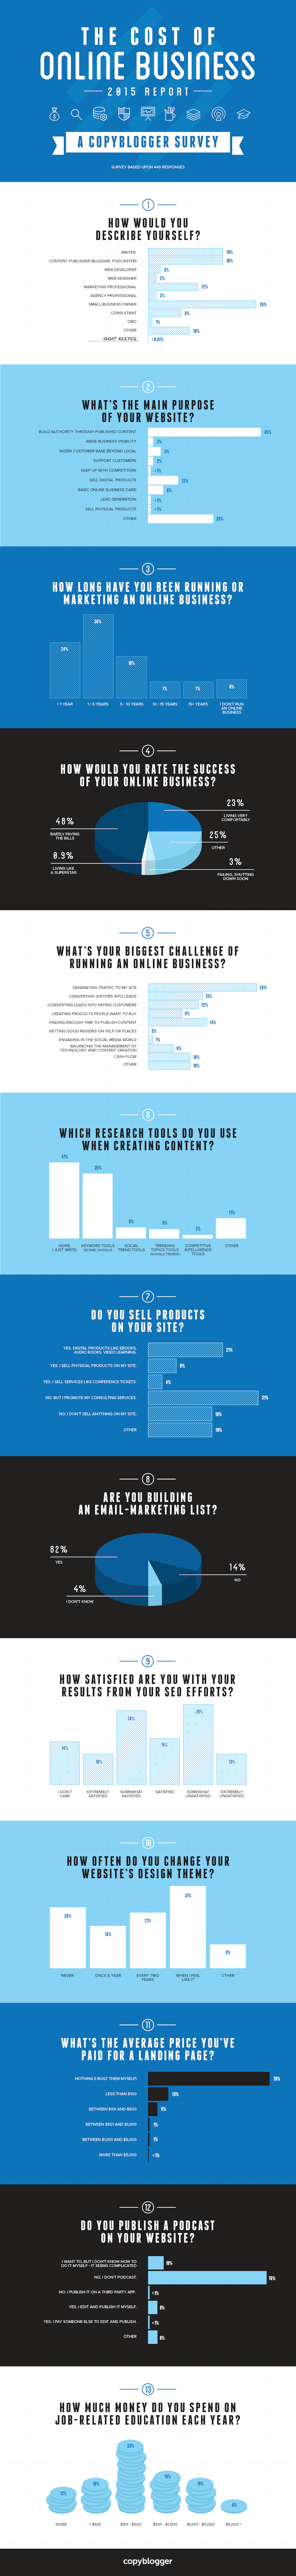 copyblogger-2015-online-business-report-infographic